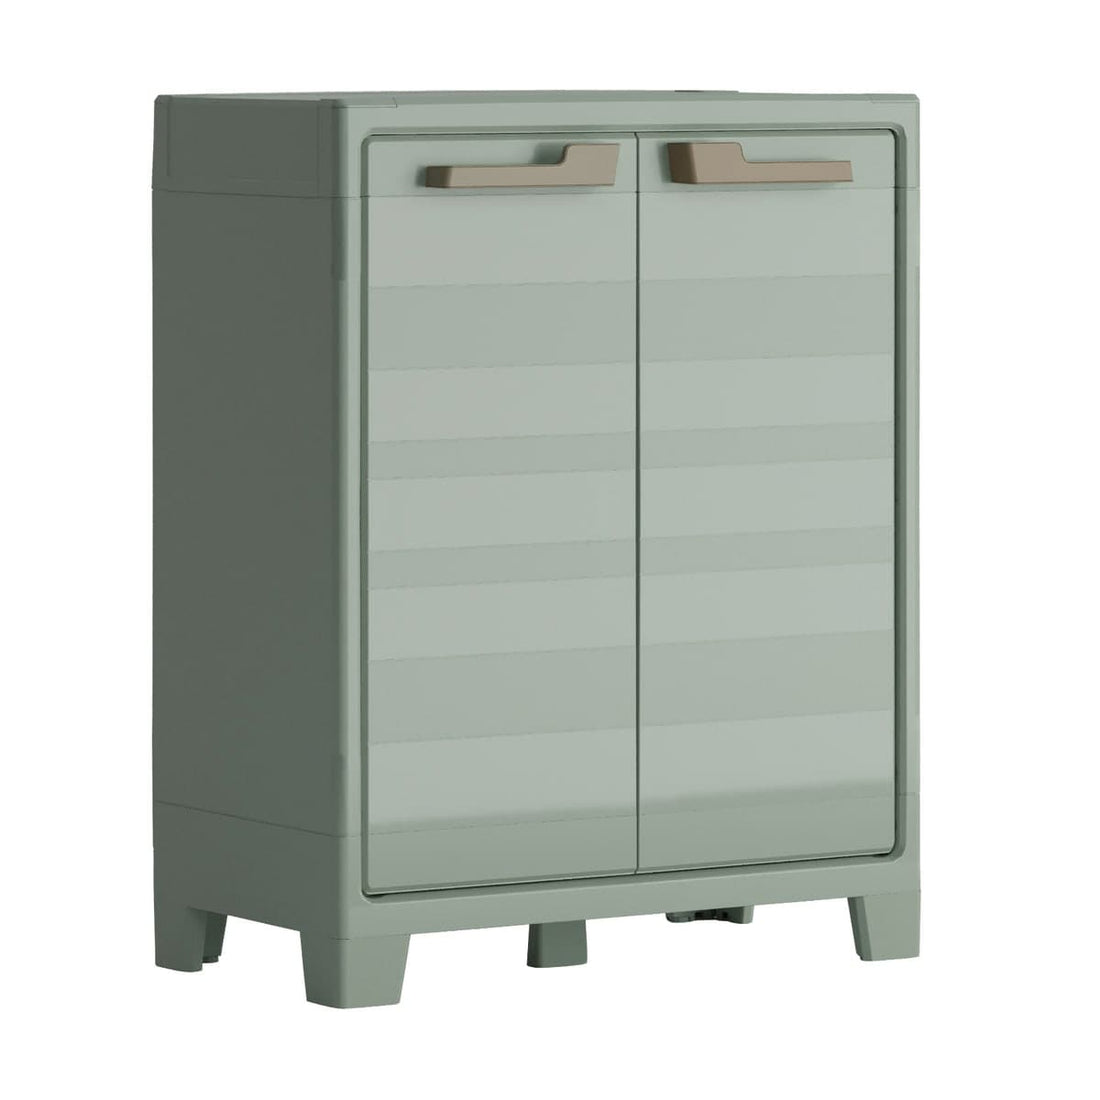 LOW PLANET CABINET 80x44x100h 2 ADJUSTABLE RACKS RECYCLED MATERIAL - best price from Maltashopper.com BR440002955